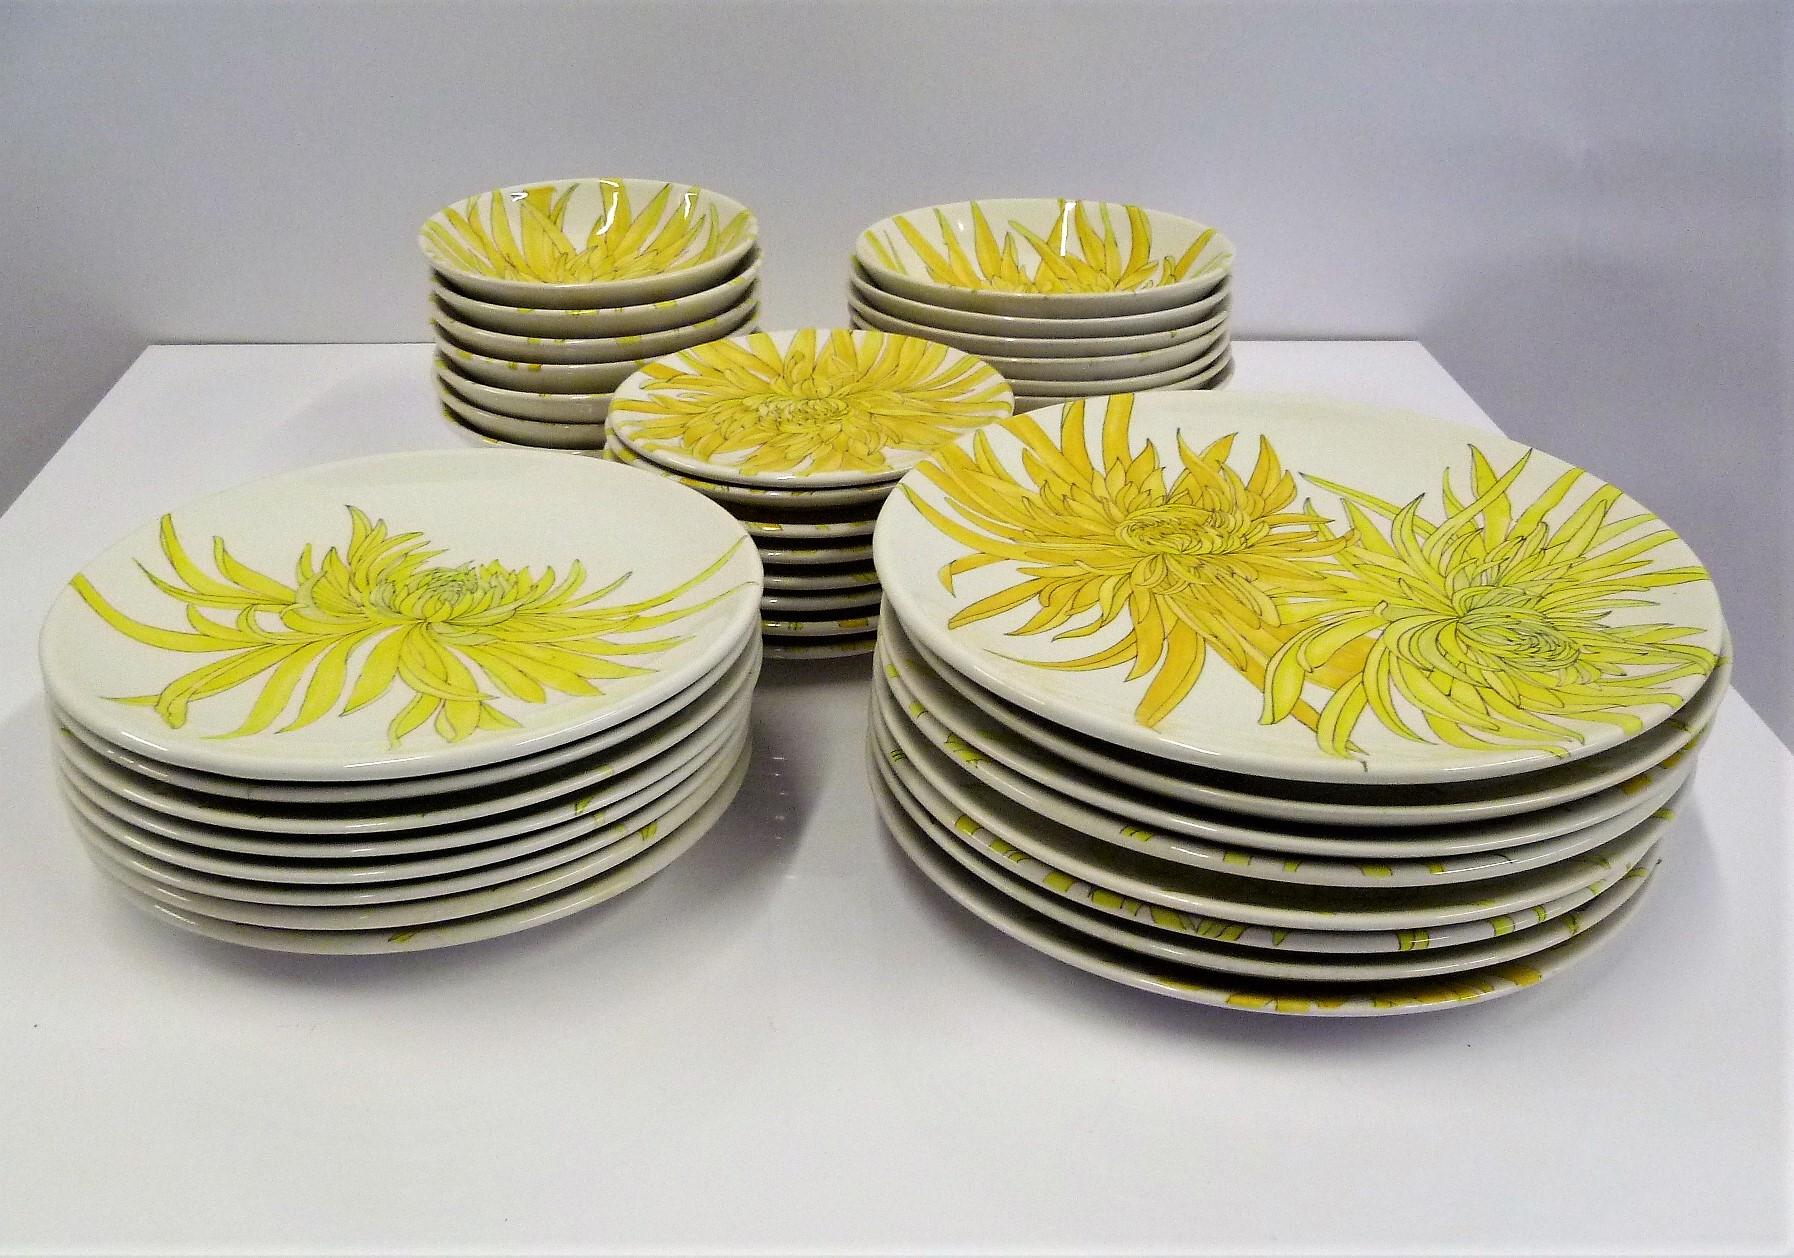 Almost an 8 place settings of hard to find Ceramiche Ernestine hand painted dinnerware made in the 1950s in Northern Italy. The Chrysanthemum pattern P14 is colorful and visually very pleasing with its flowers almost covering the entire plates and a